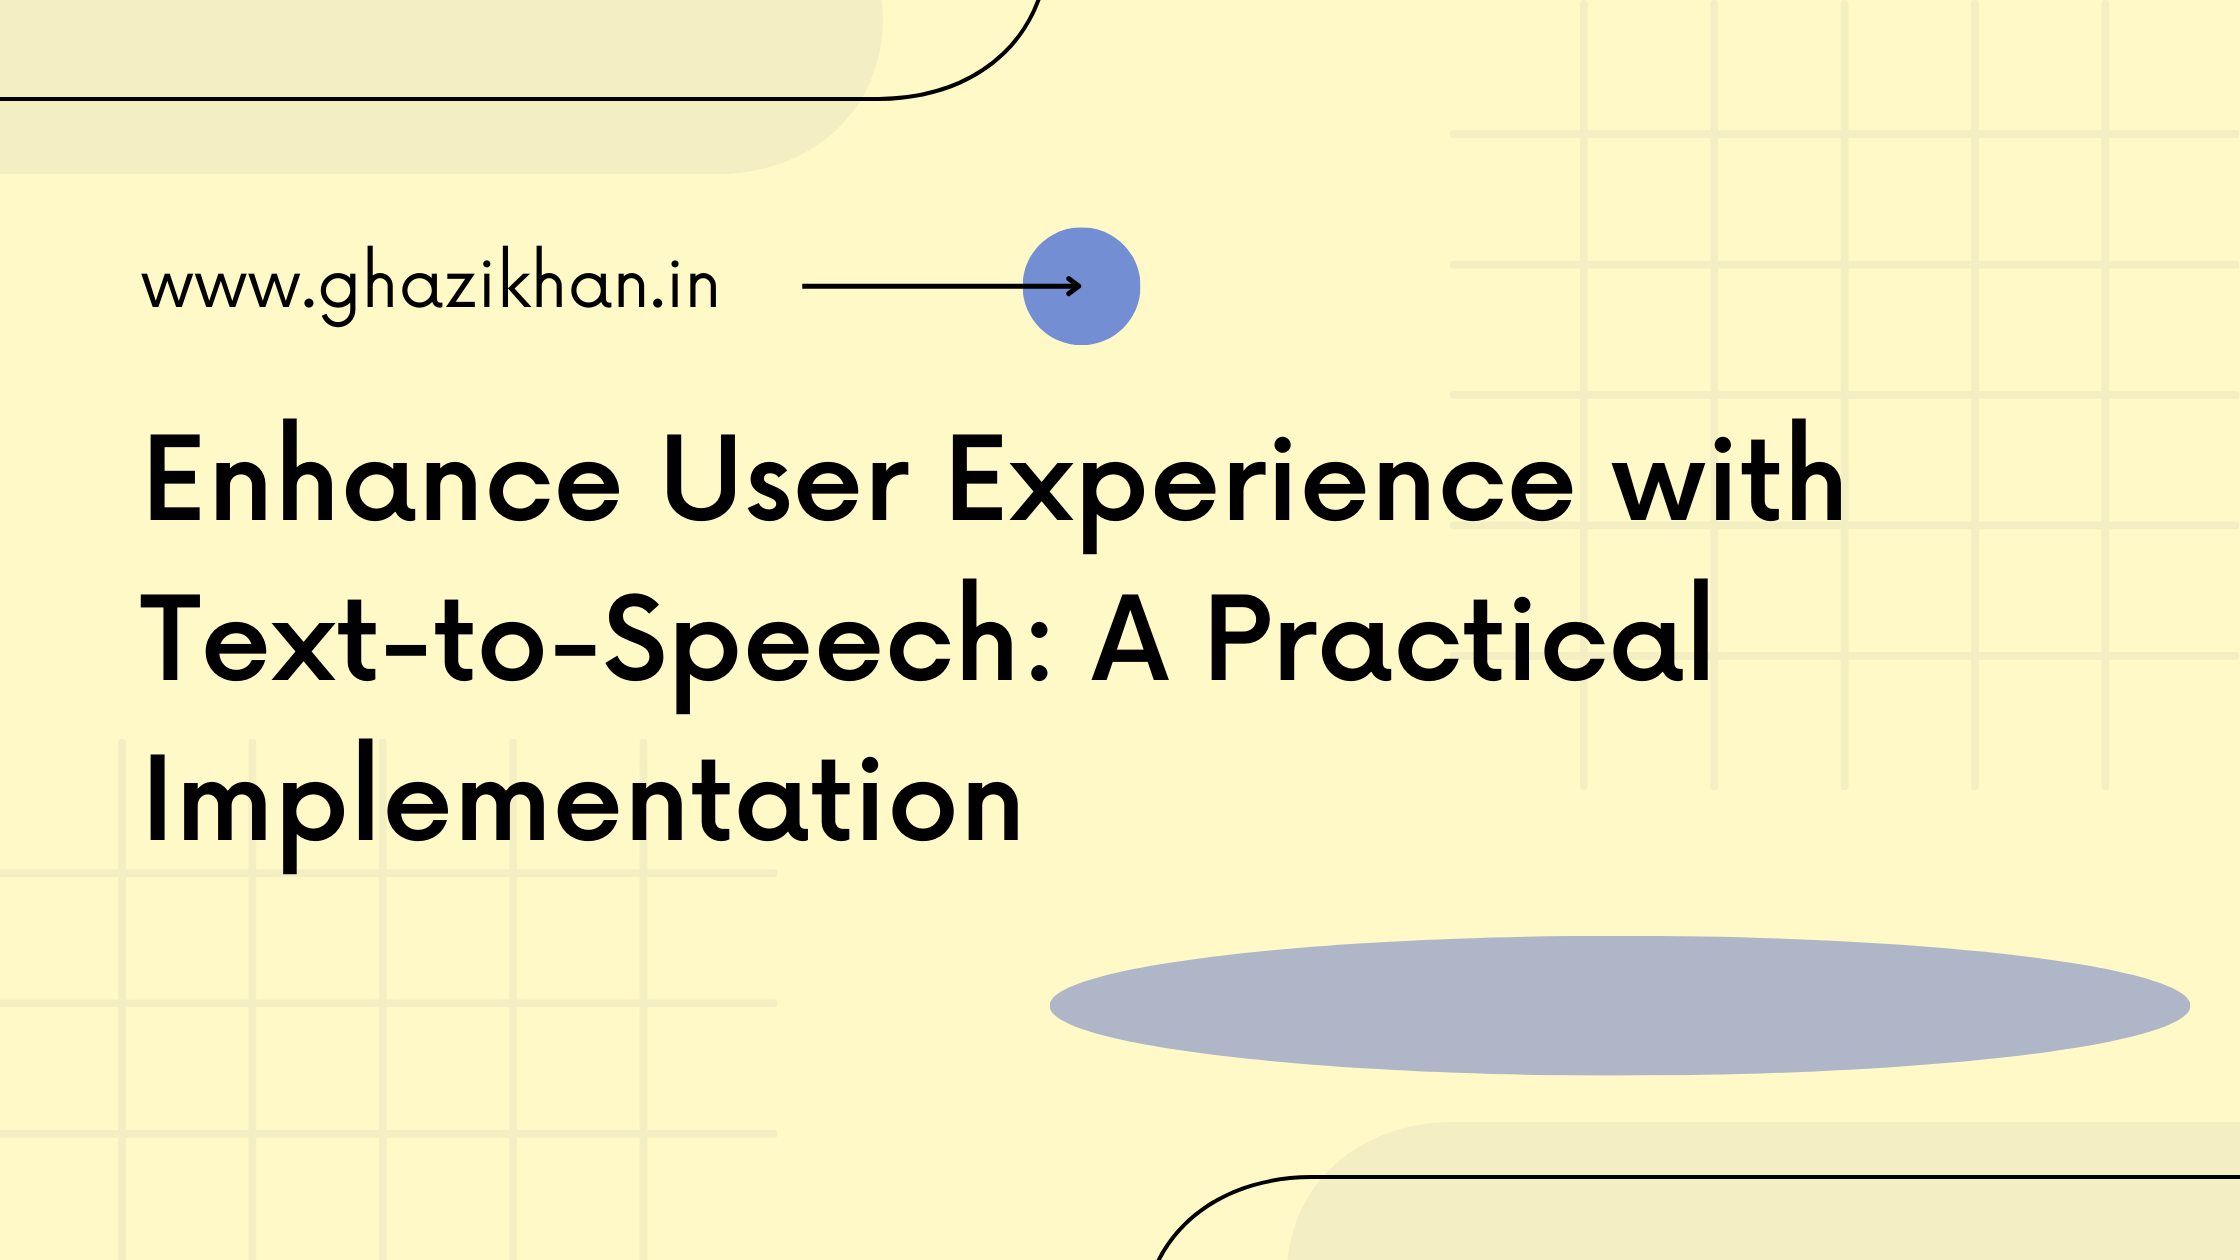 Enhance User Experience with Text-to-Speech: A Practical Implementation